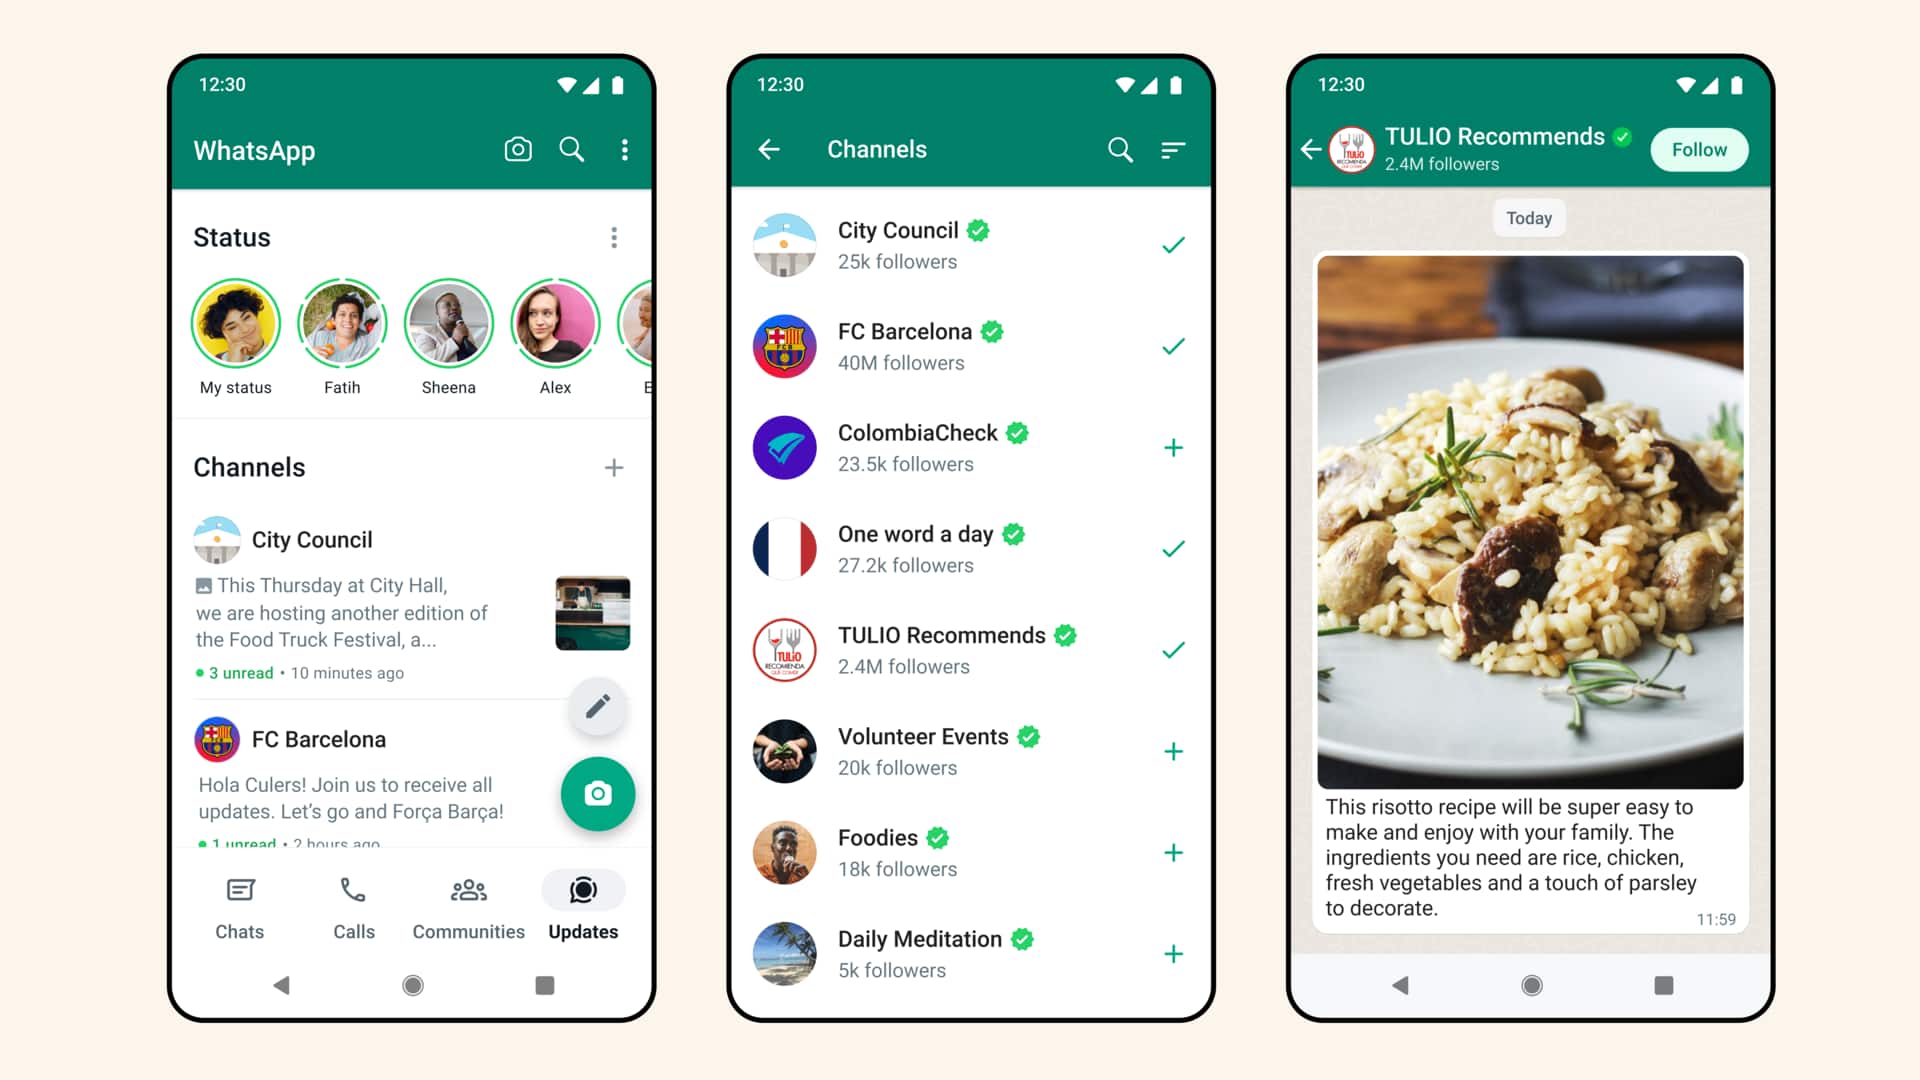 WhatsApp launches new 'Channels' feature to broadcast messages